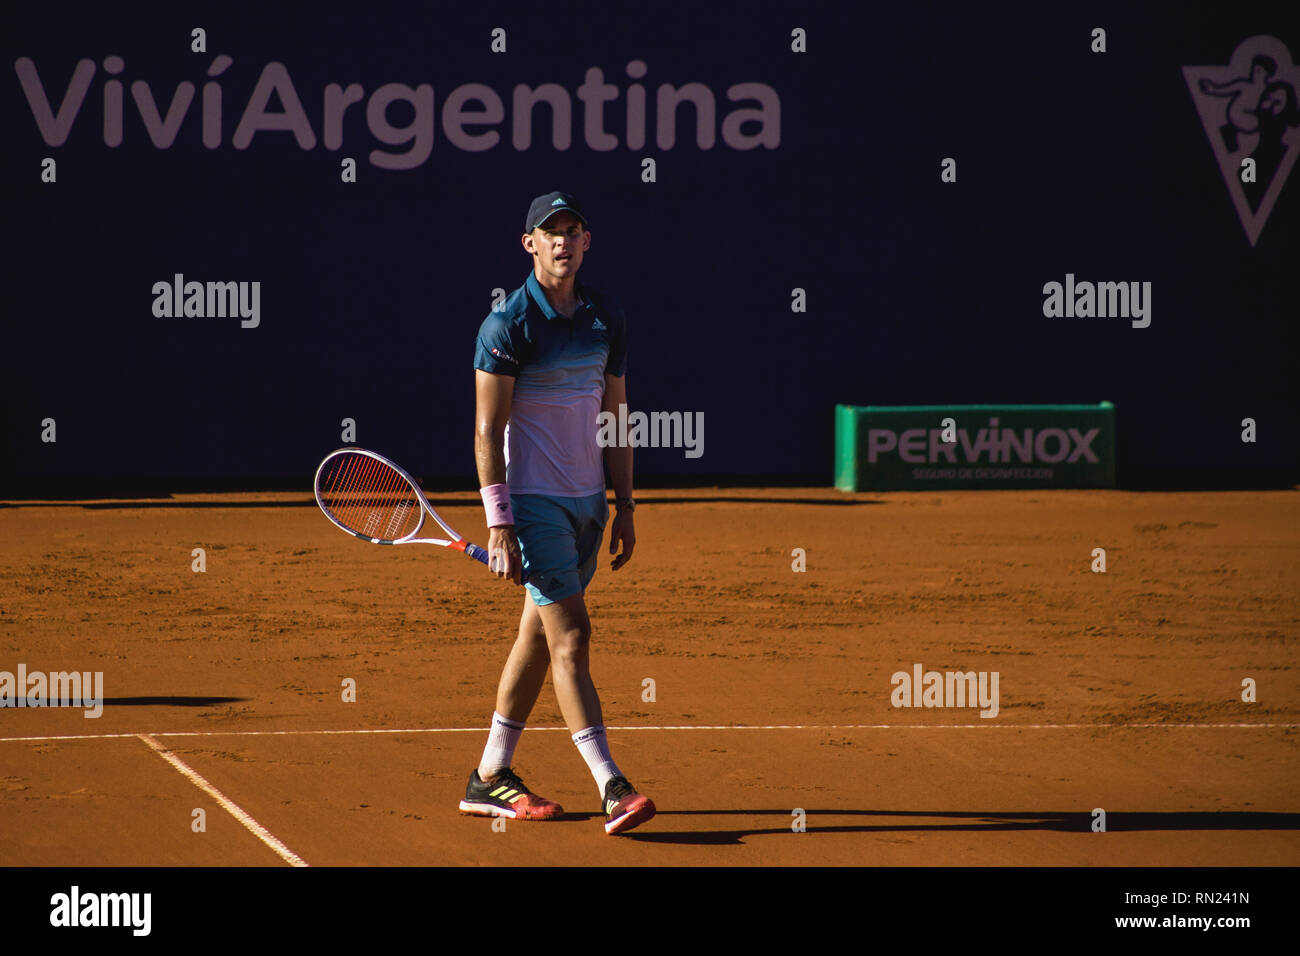 Buenos Aires, Federal Capital, Argentina. 16th Feb, 2019. Diego Schwartzman defeated Dominic Thiem and is in the final. After losing the priemer set 2 games to 6 Diego undertook the comeback, winning the second set 6-4. The third set could have been for any of the two players who fought until the end taking the match to tie break where ''El Peque'' (The Little) with the fans on their side ended up beating the Austrian 7 (7) -6 (5). Credit: ZUMA Press, Inc./Alamy Live News Stock Photo